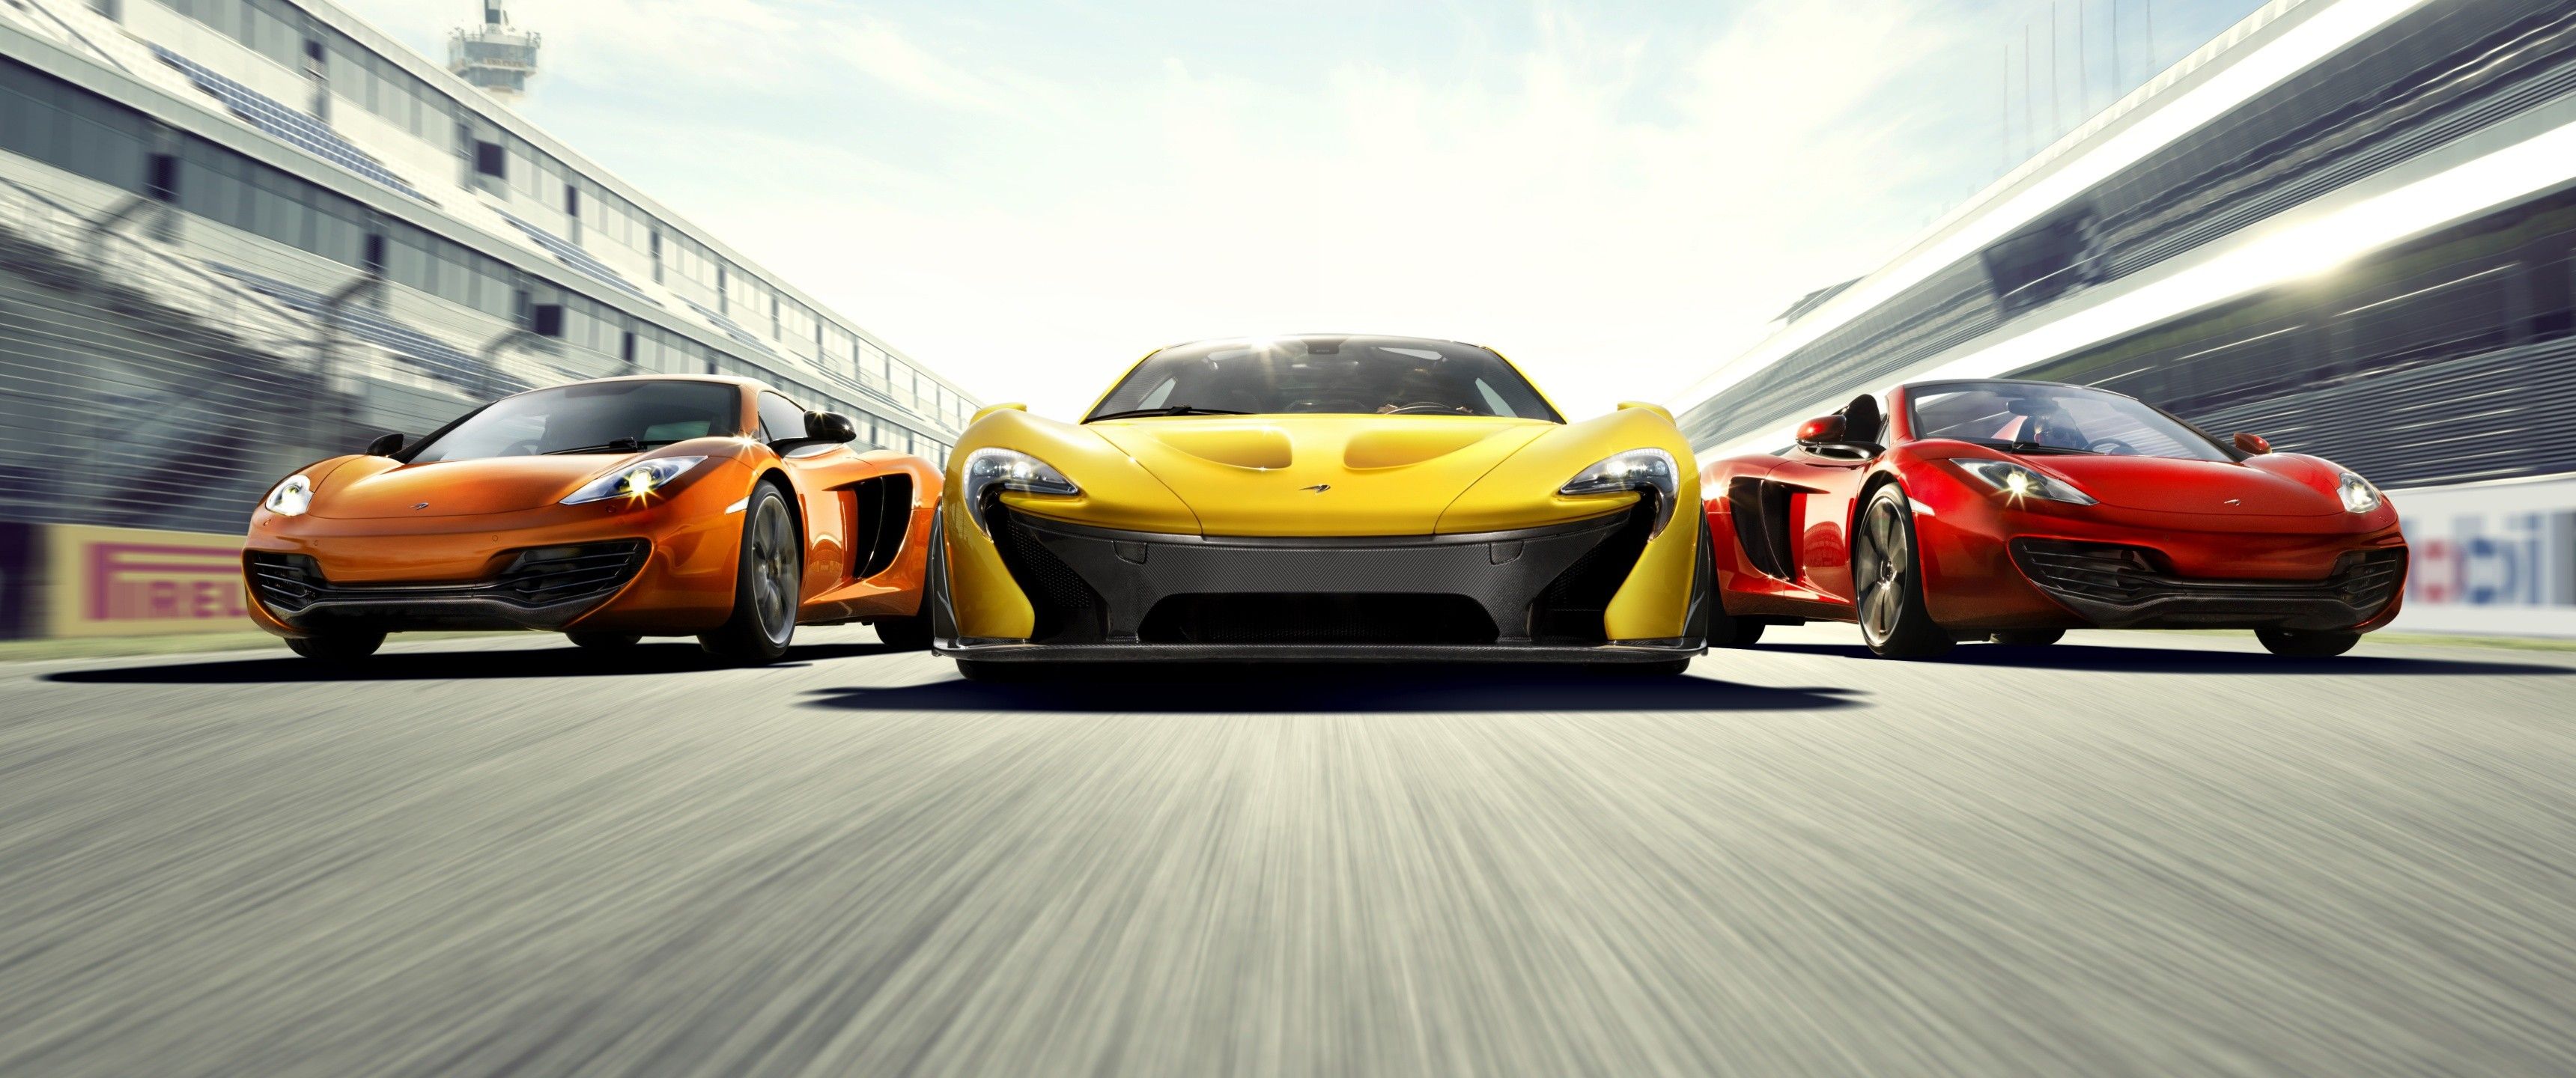 Mclaren P1 Race Tracks, HD Cars, 4k Wallpaper, Image, Background, Photo and Picture